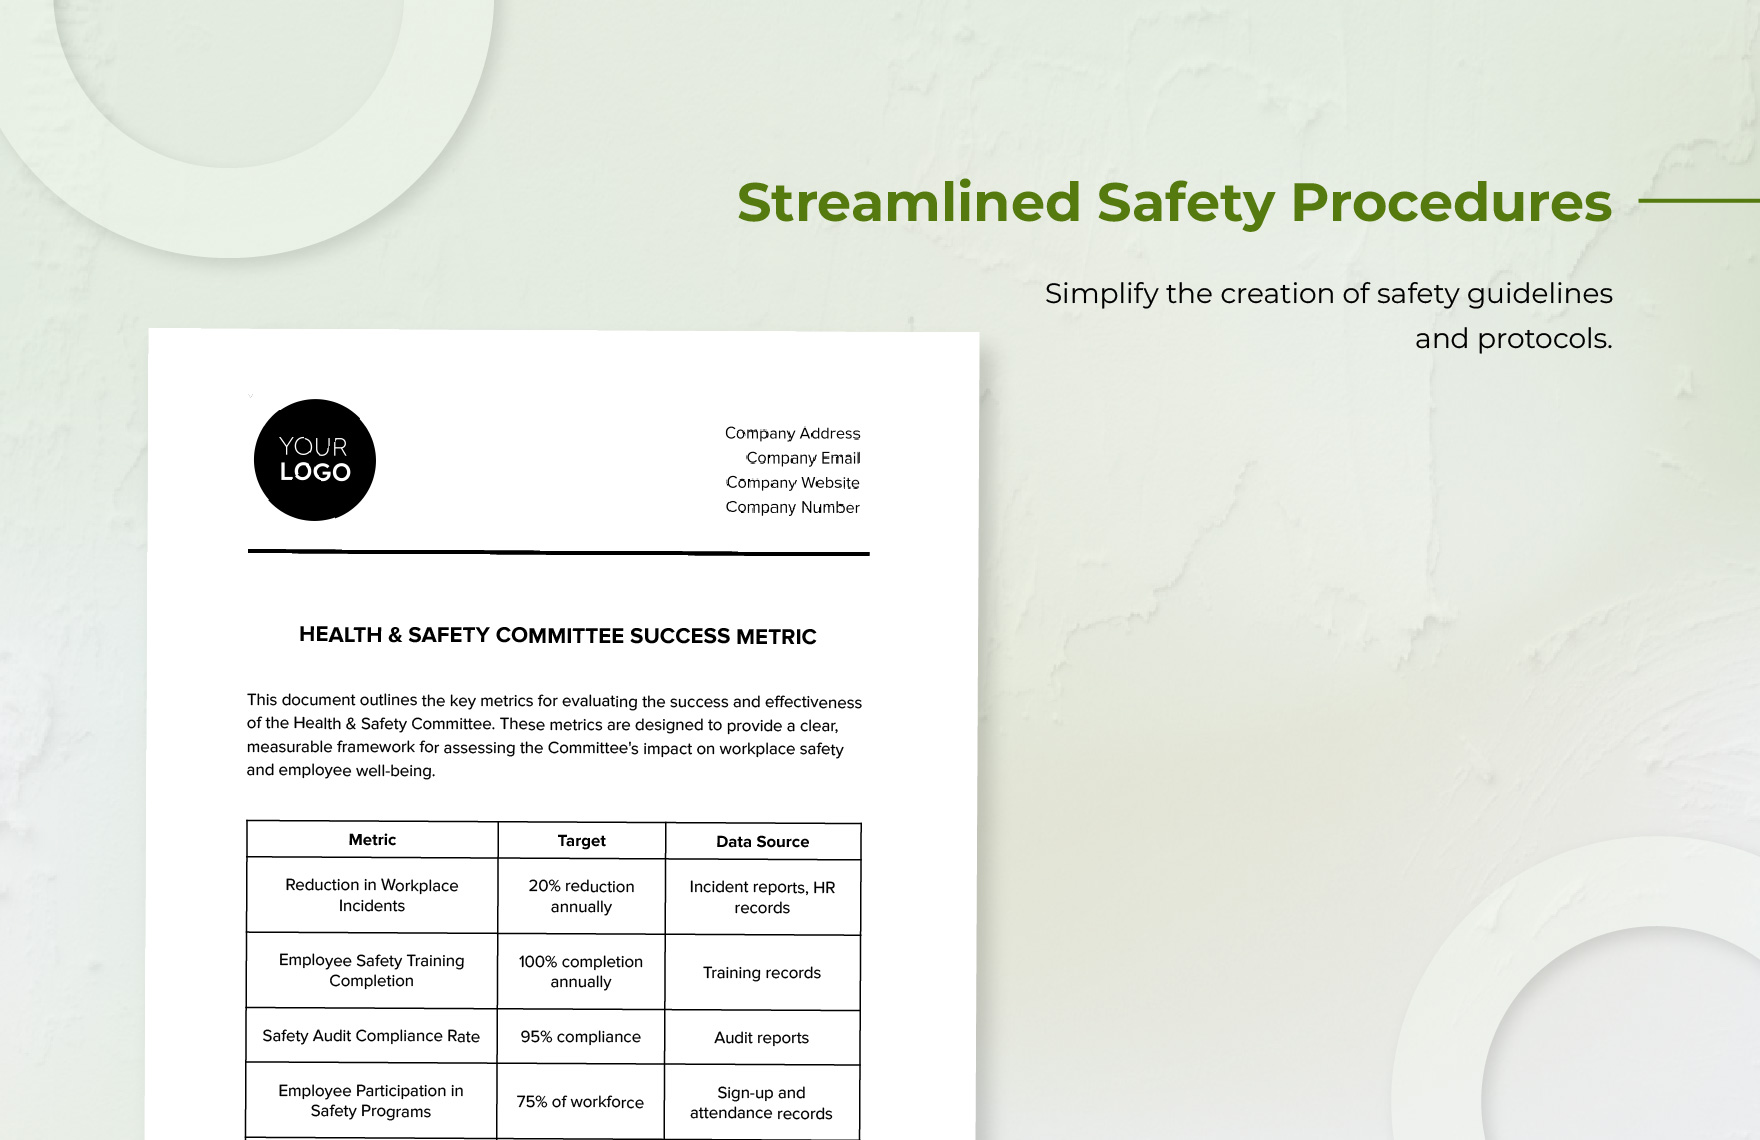 Health & Safety Committee Success Metric Template